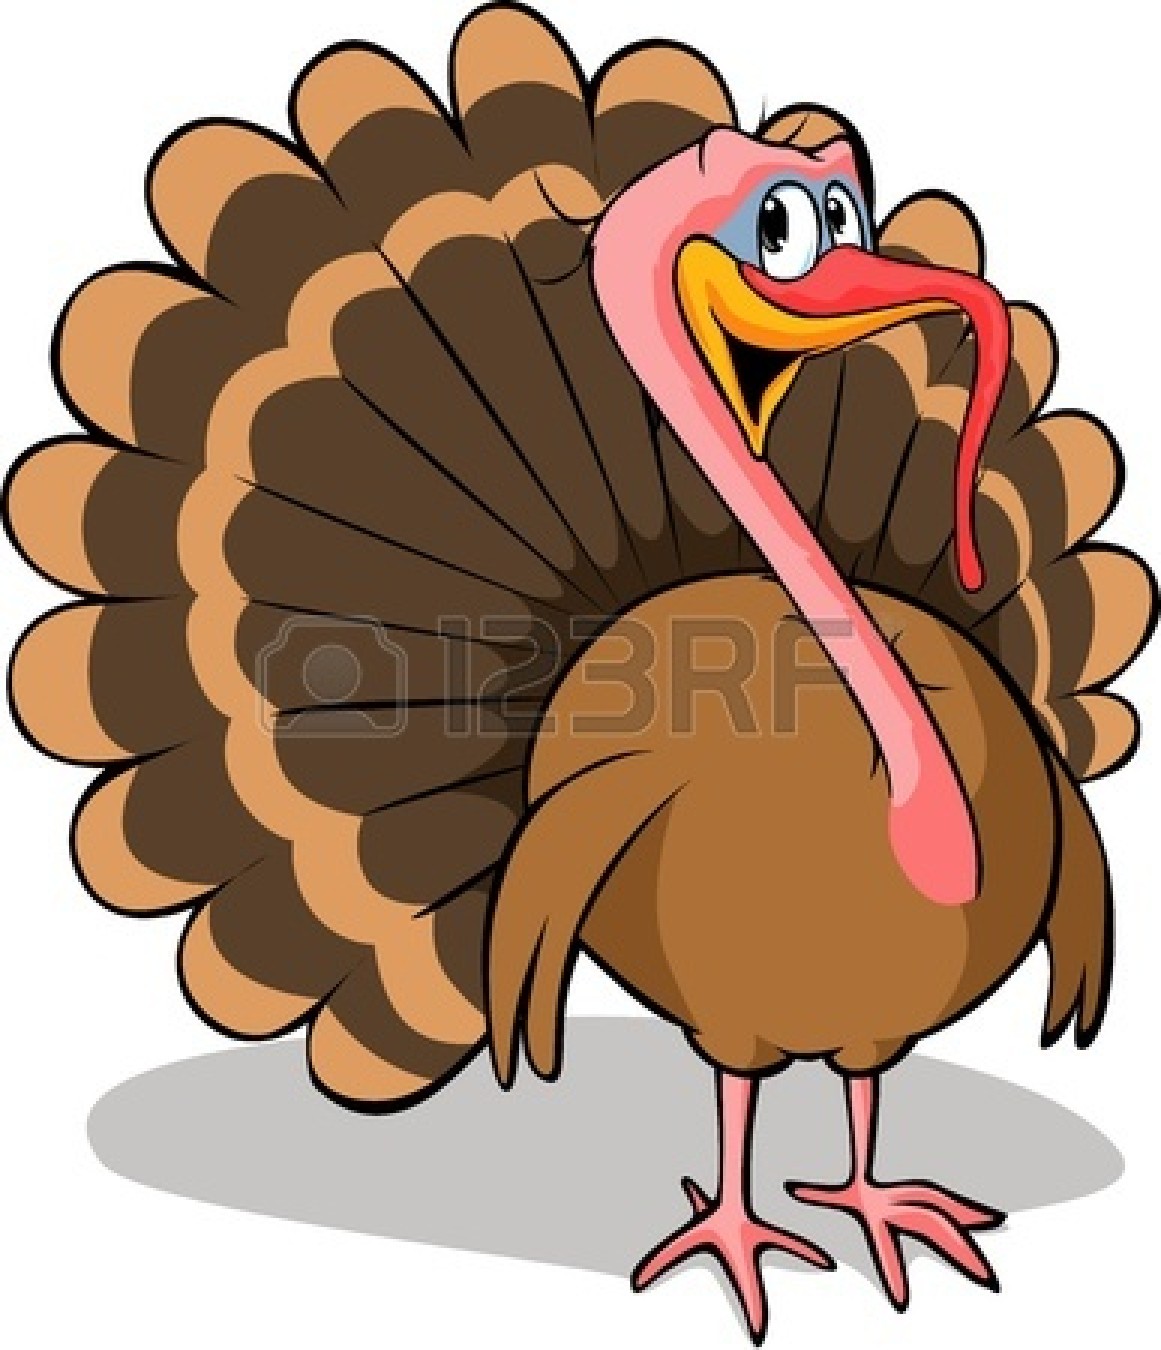 Running Turkey Clipart Black And White   Clipart Panda   Free Clipart    